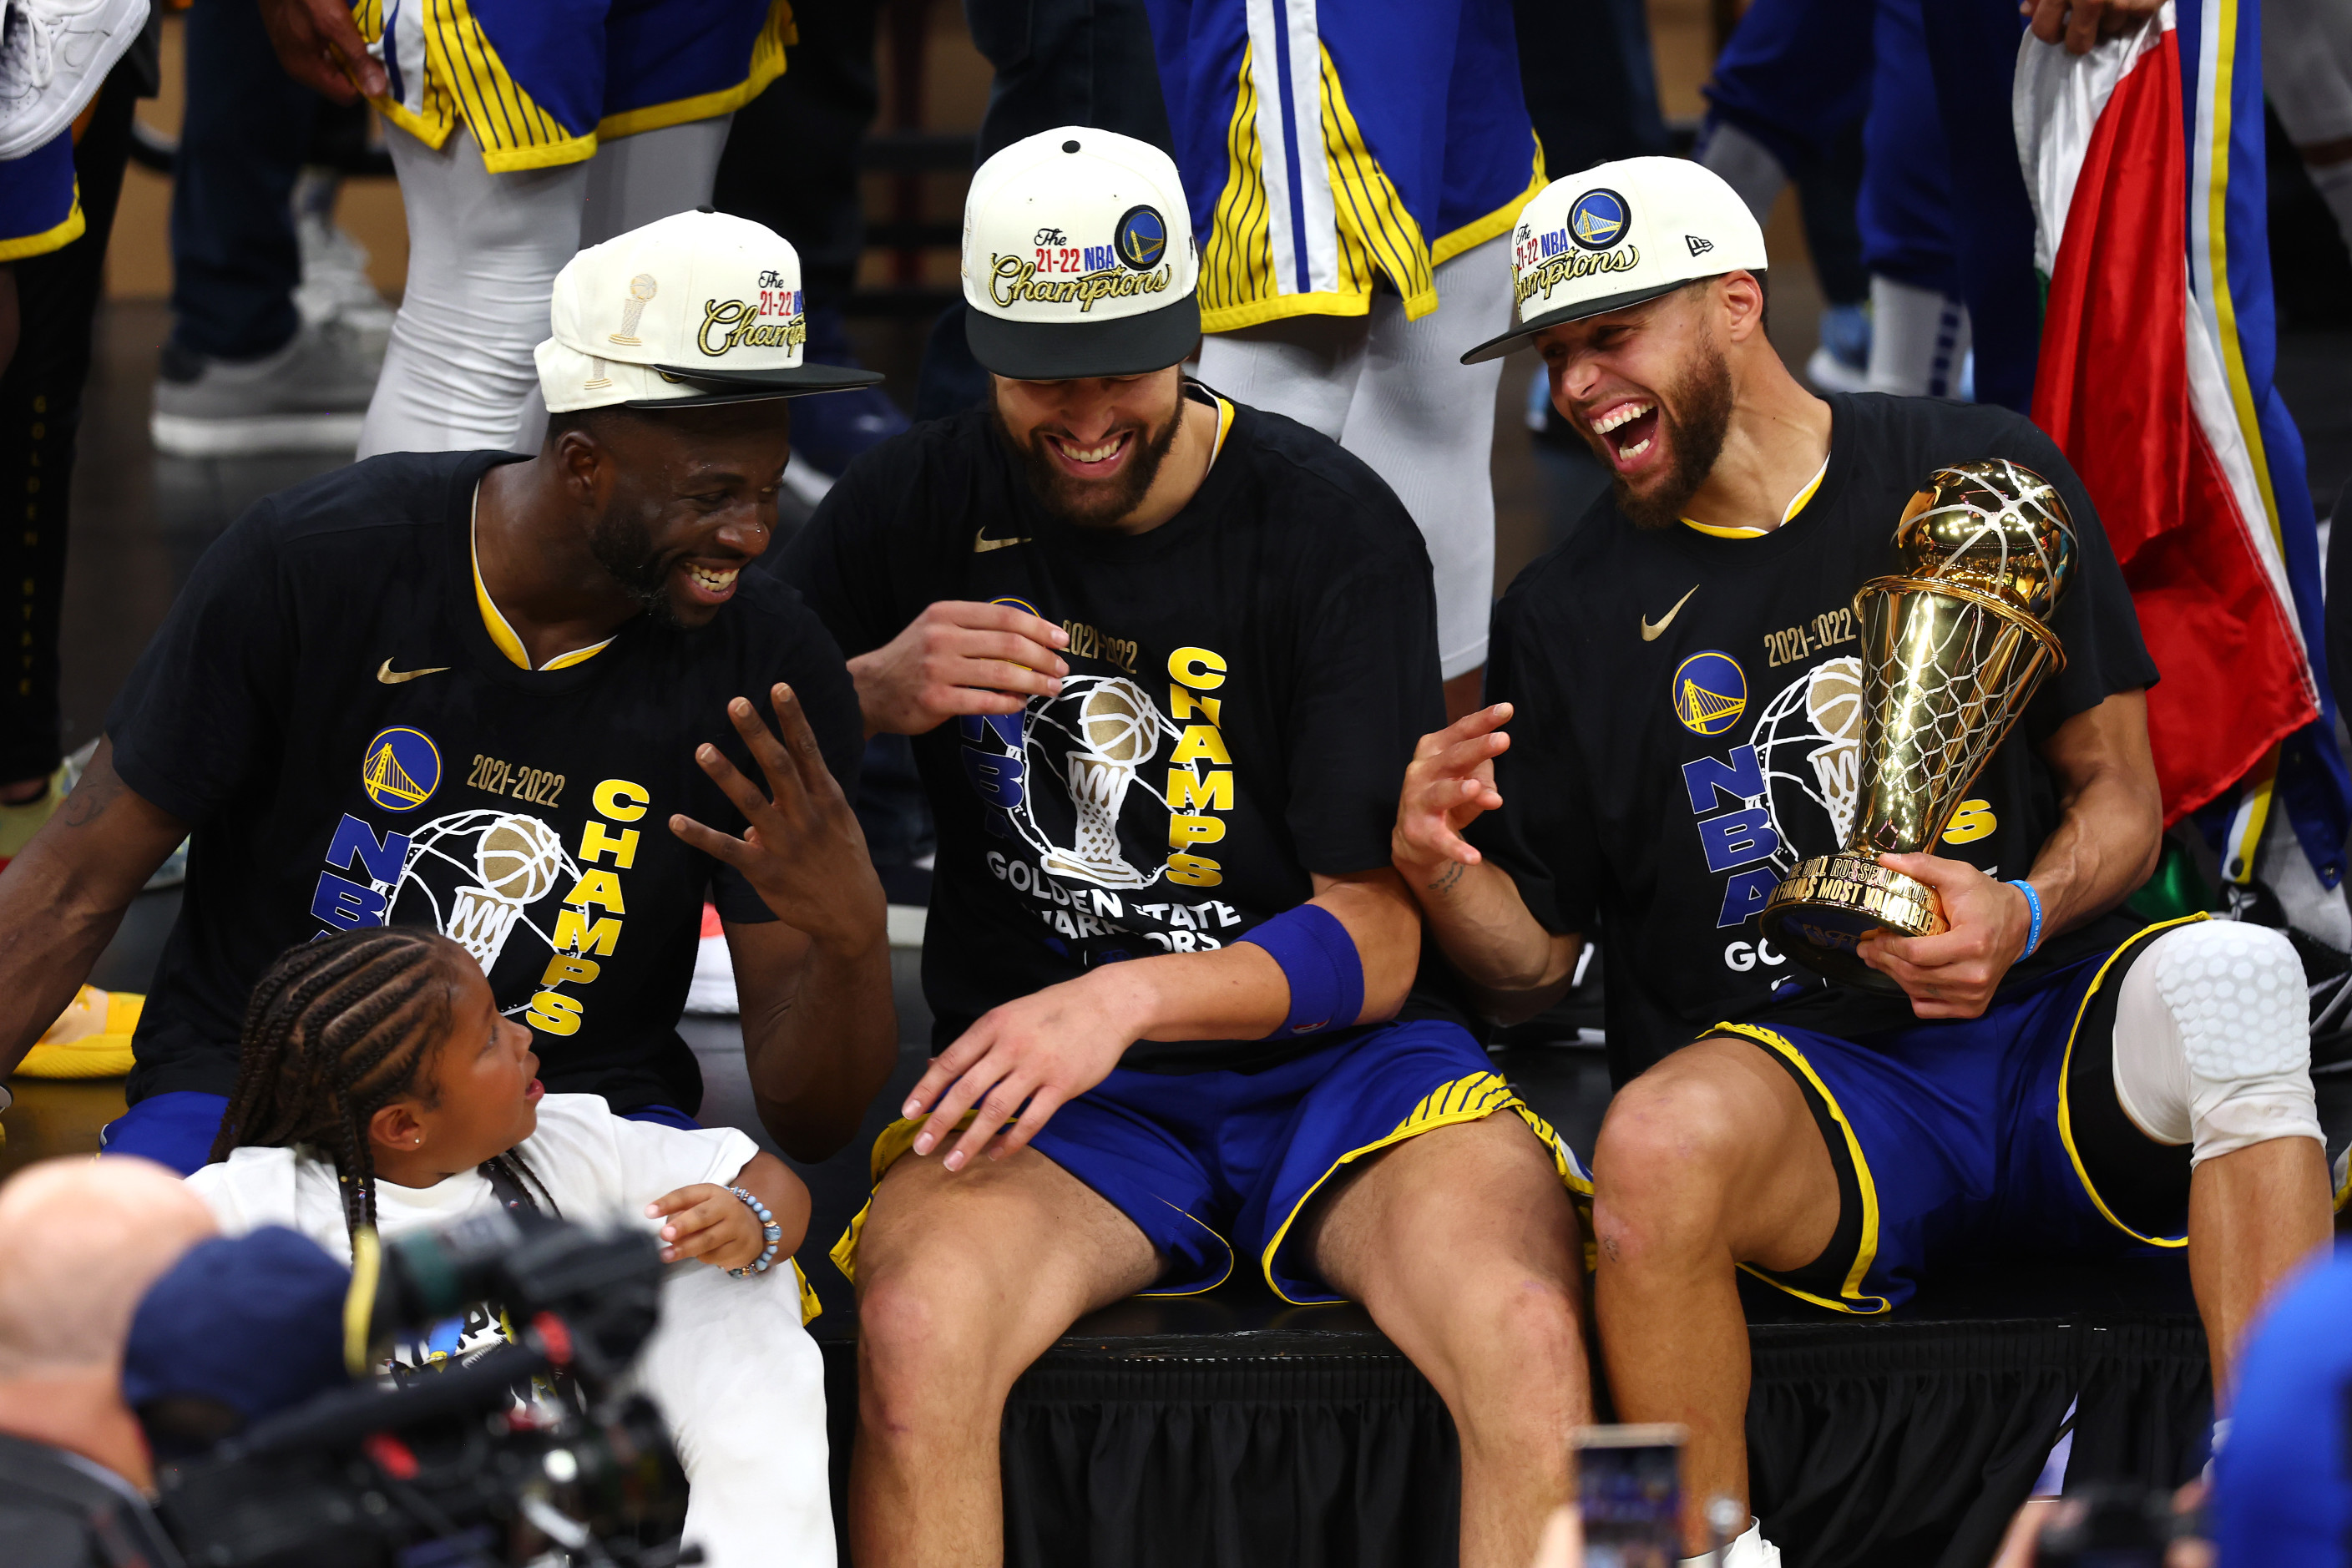 Report: NBA championship parade cost Warriors owners roughly $4